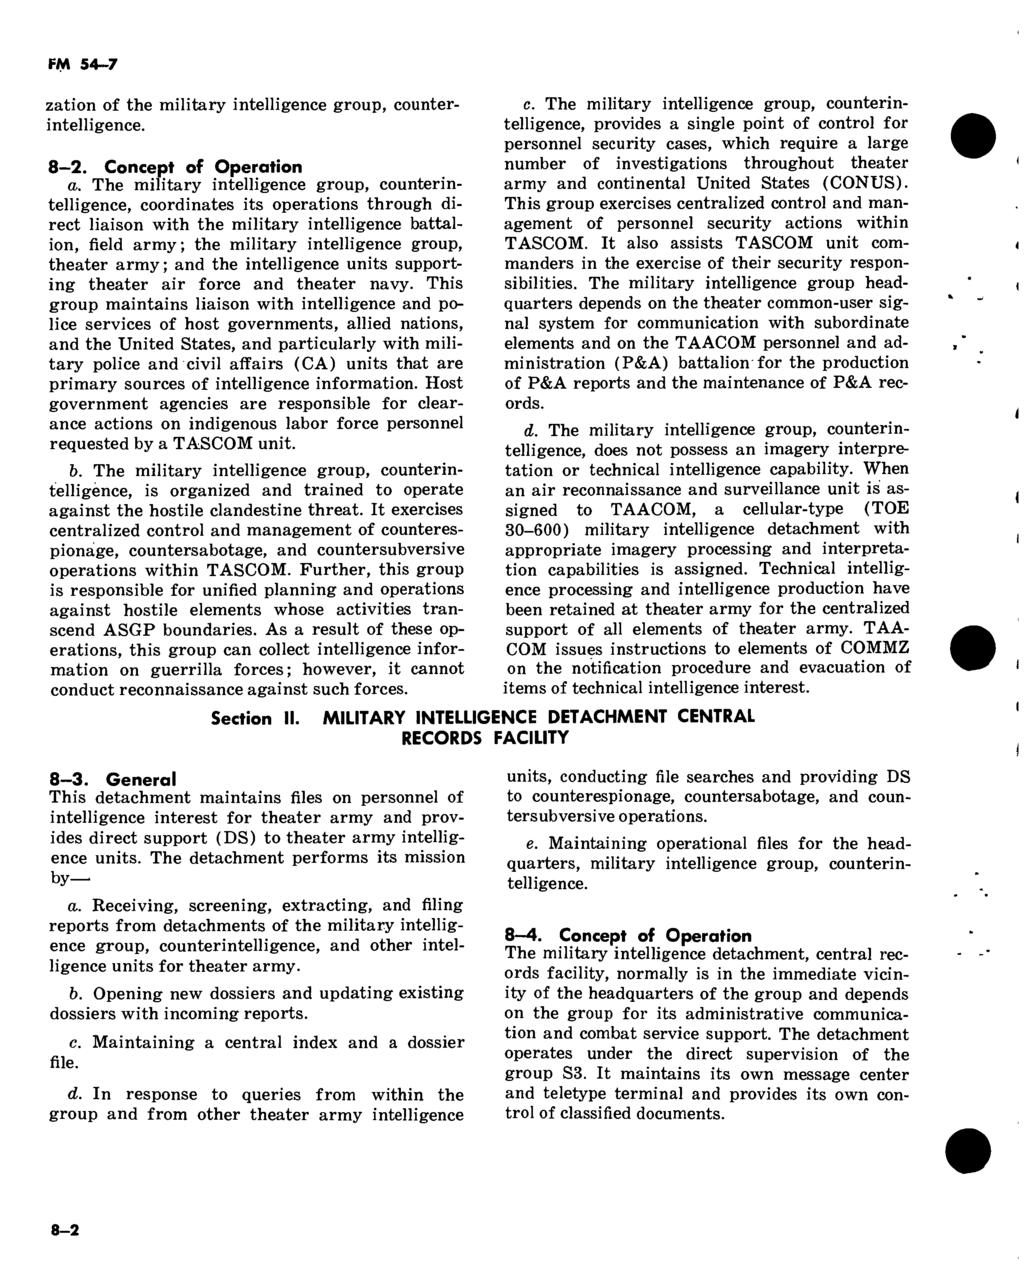 zation of the military intelligence group, counterintelligence. 8-2. Concept of Operation a.